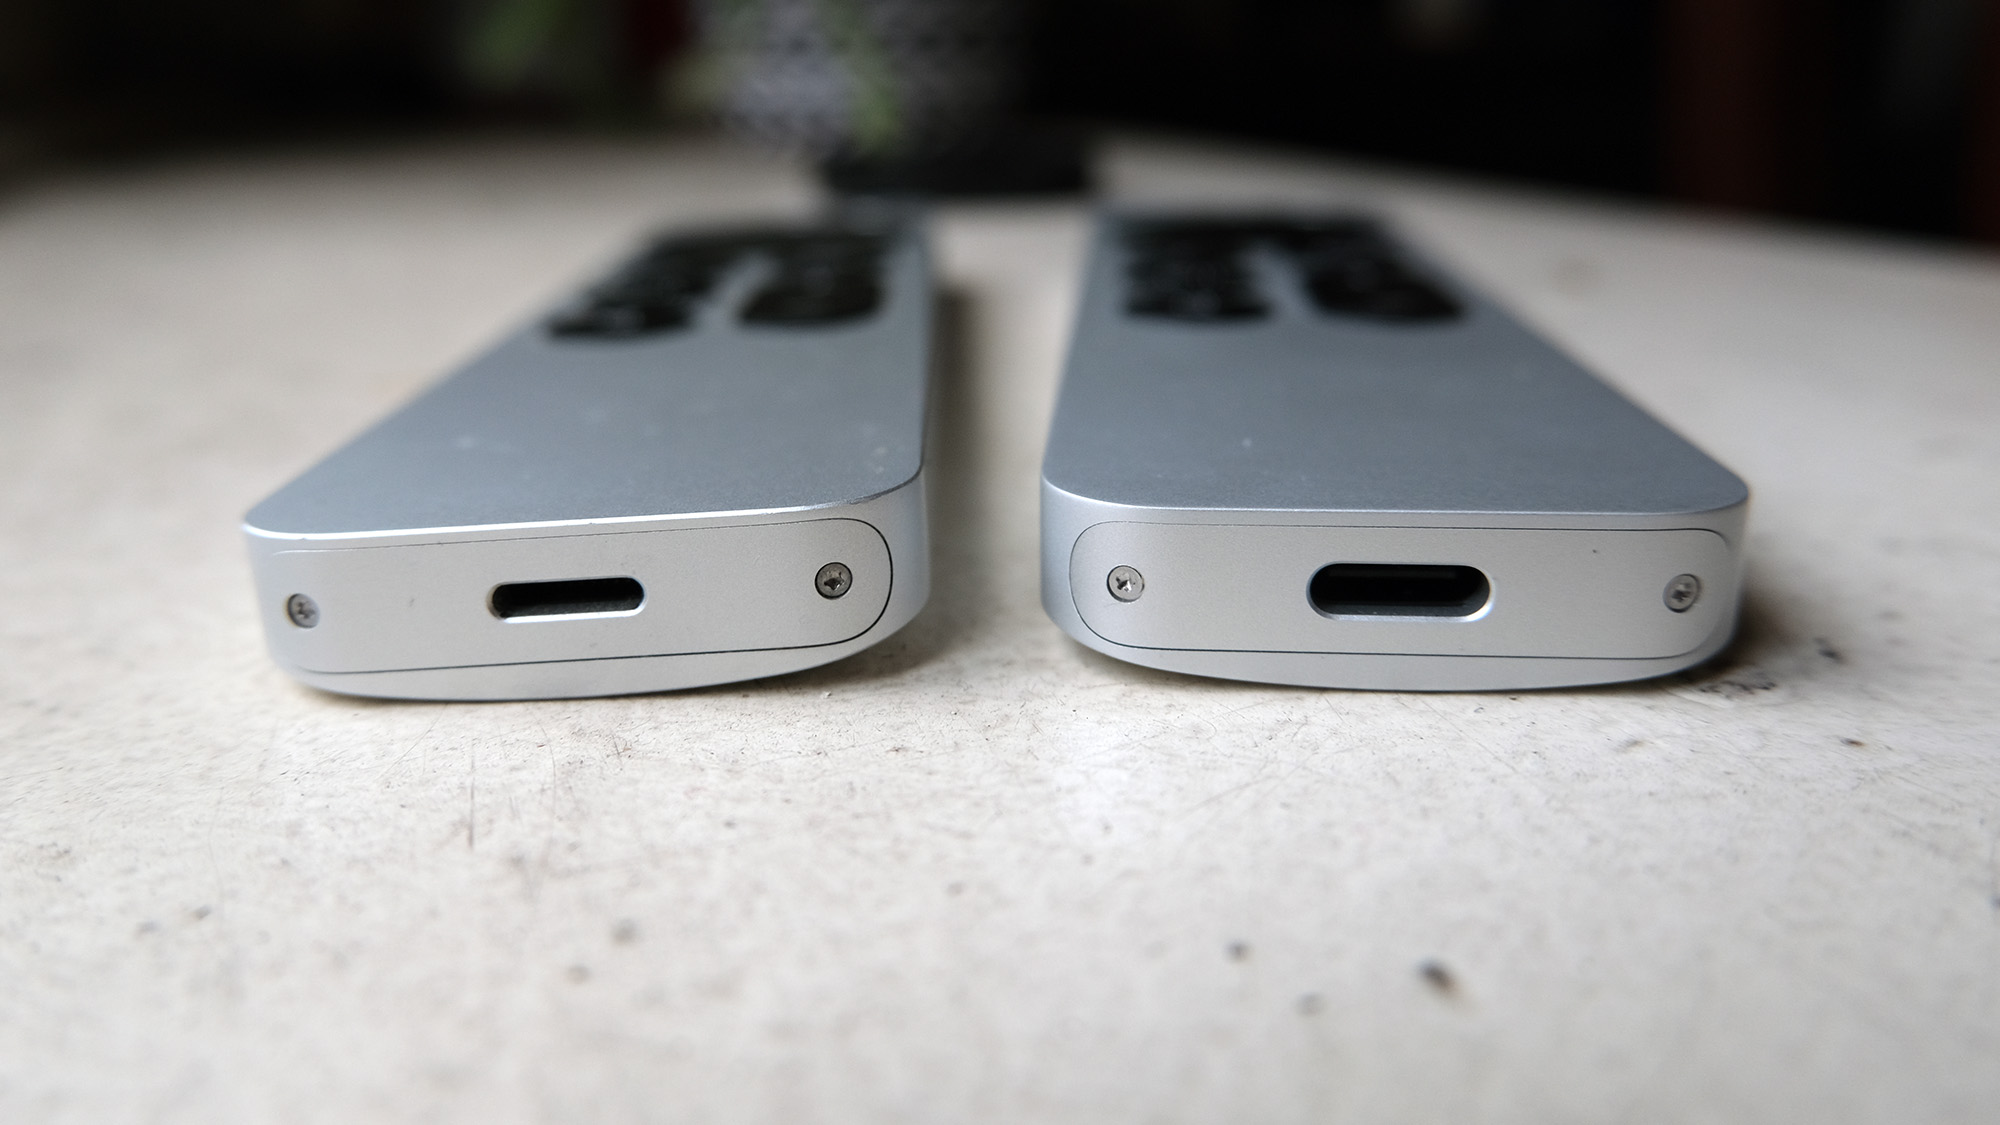 The Apple TV 4K remotes, showing (L, R) the Lightning port on the 2021 model and the USB-C port on the 2022 model.